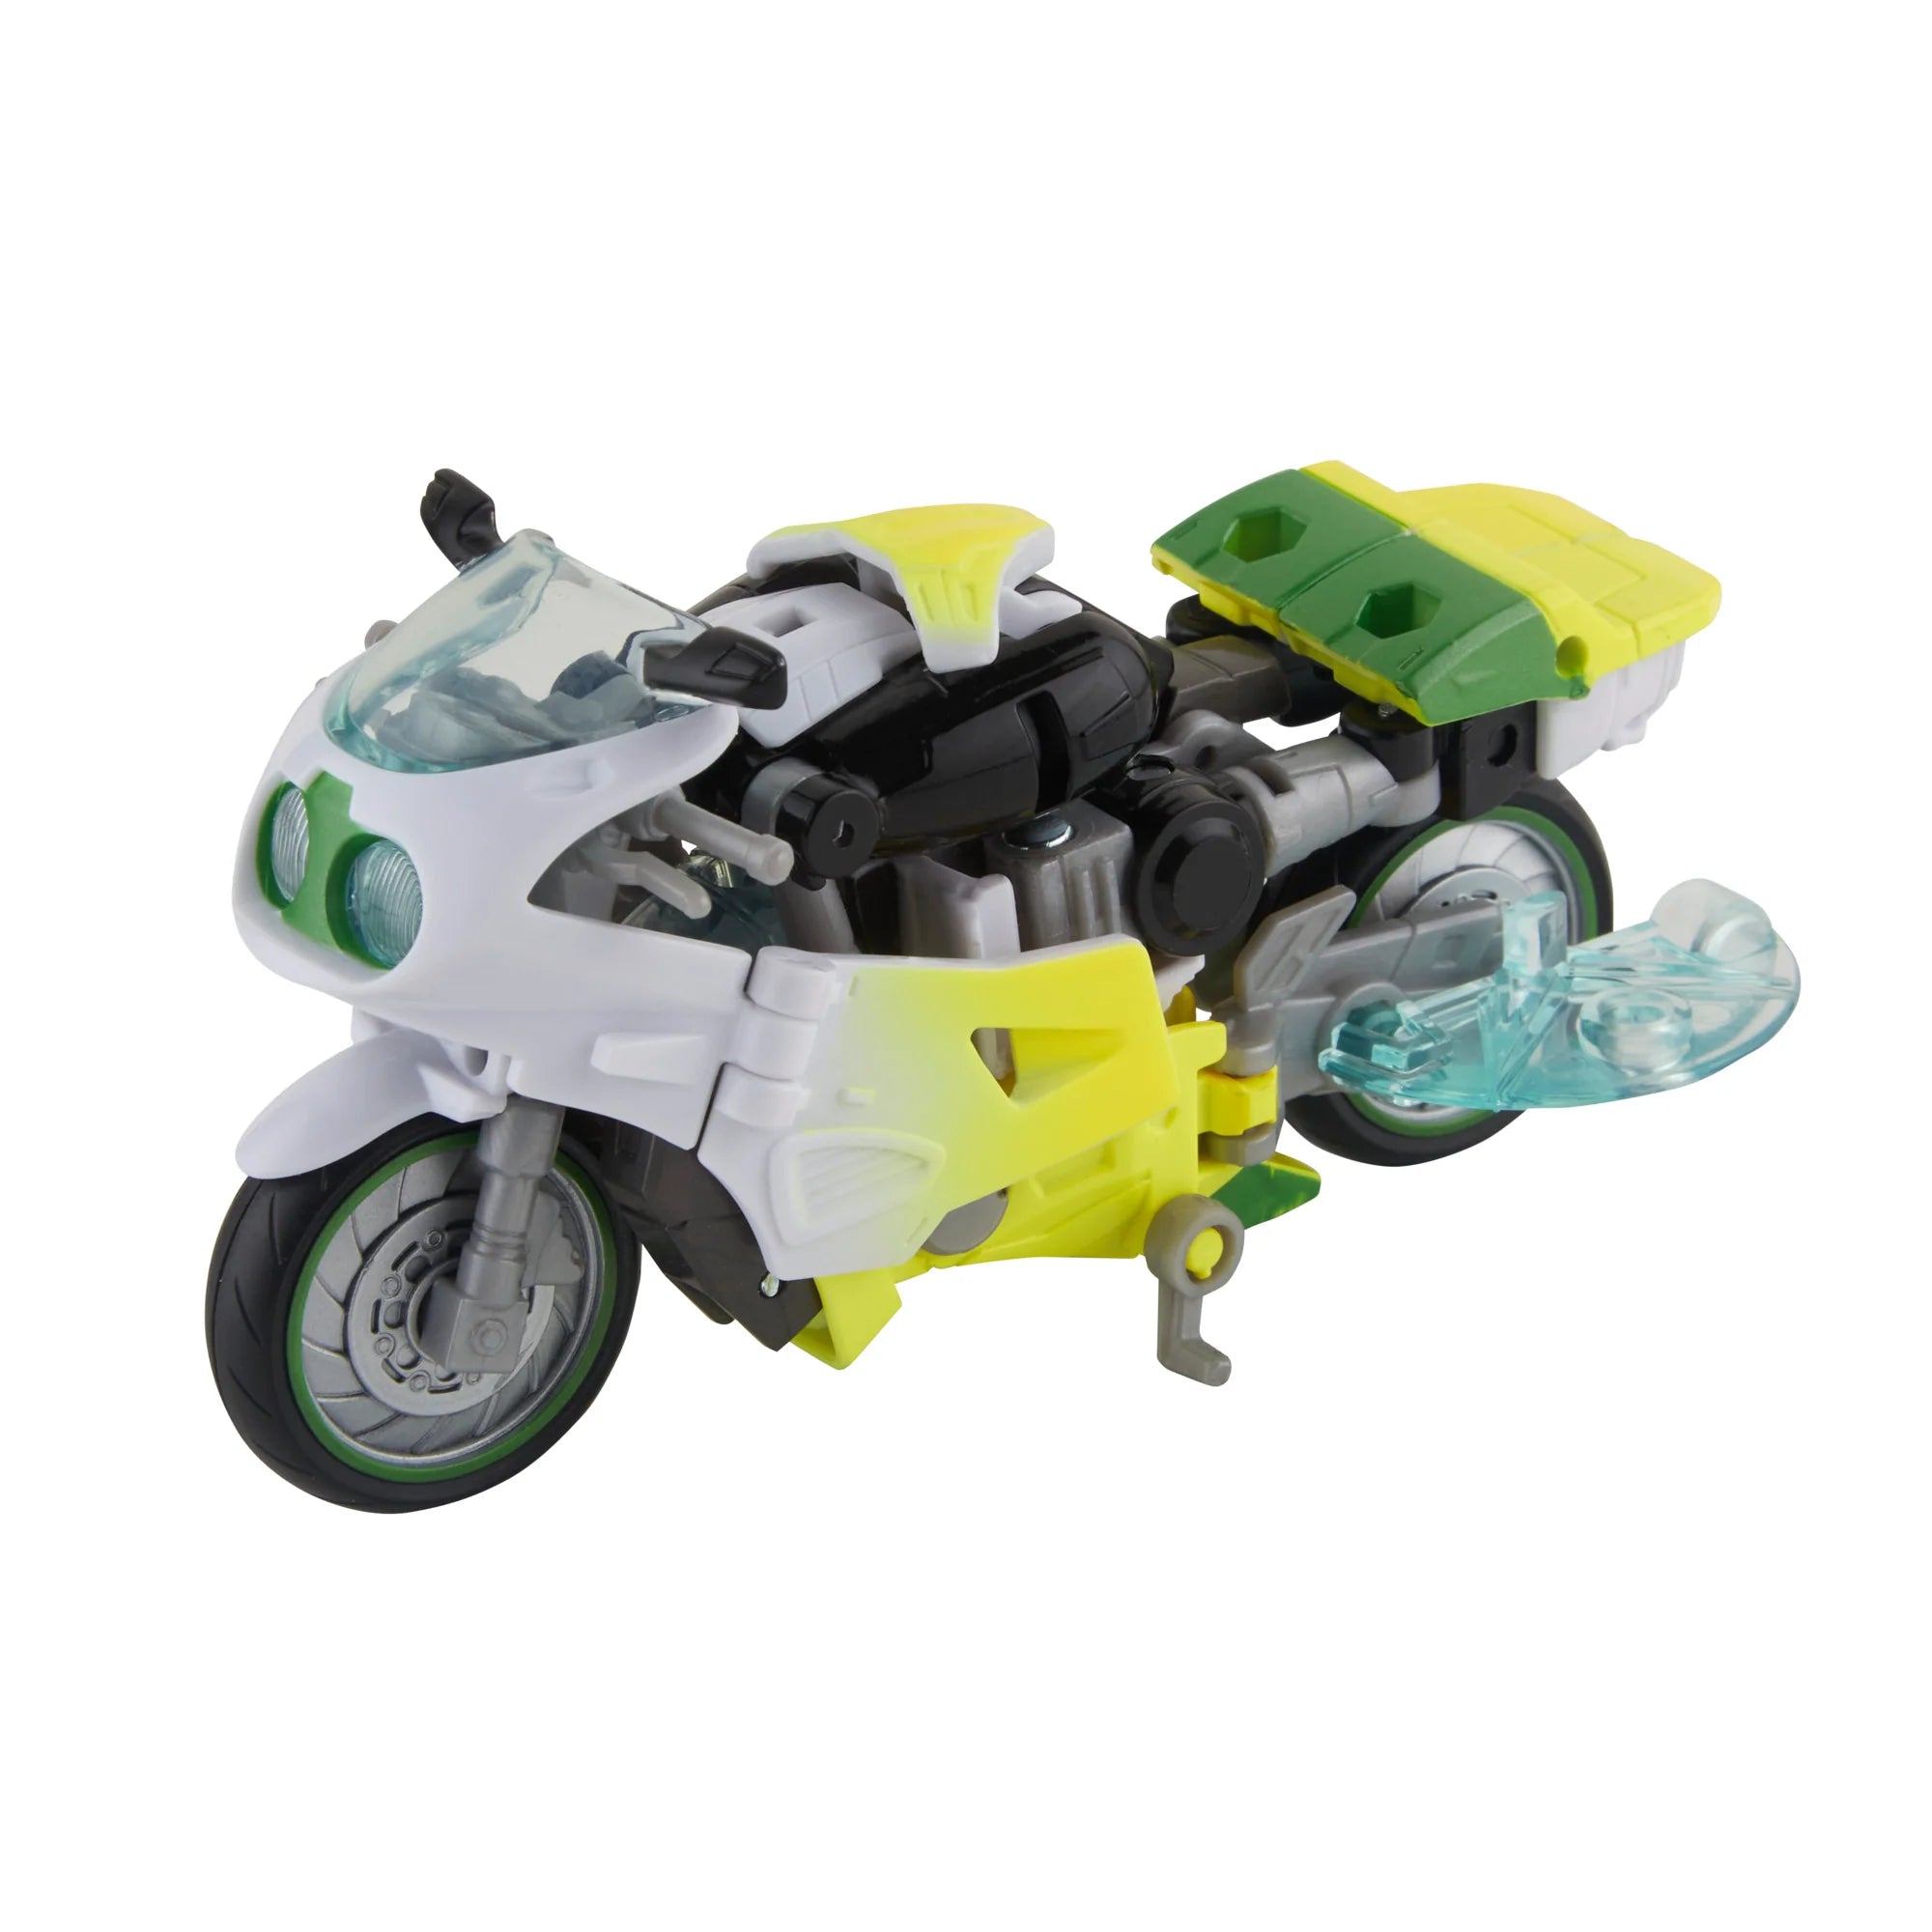 Transformers Generations Legacy Evolution Deluxe Class G2 Universe Autobot Laser Cycle Action Figure